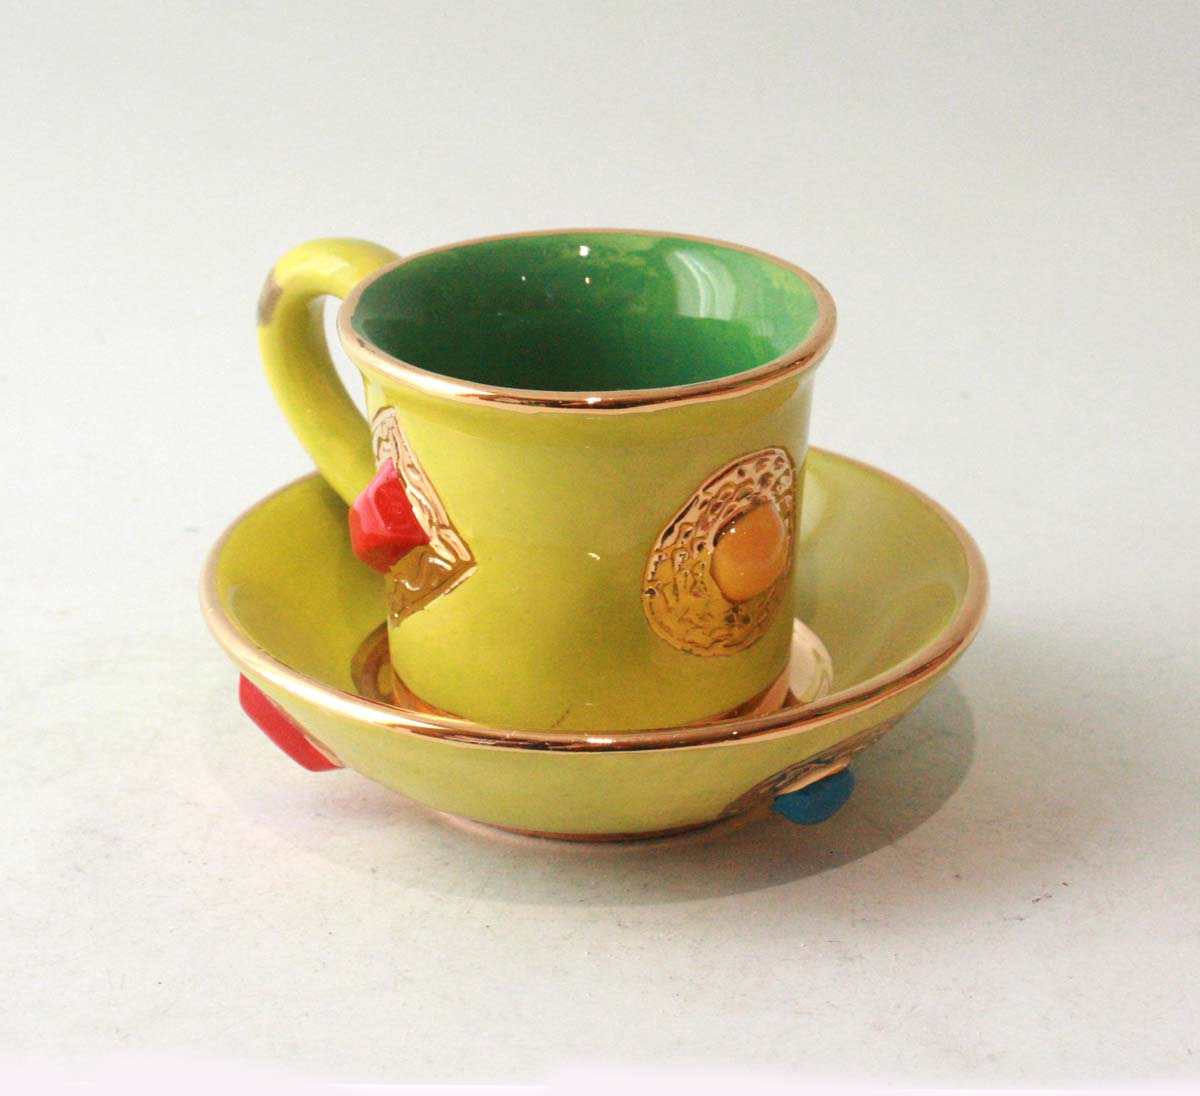 Jewelled Demi-Tasse and Saucer in Green